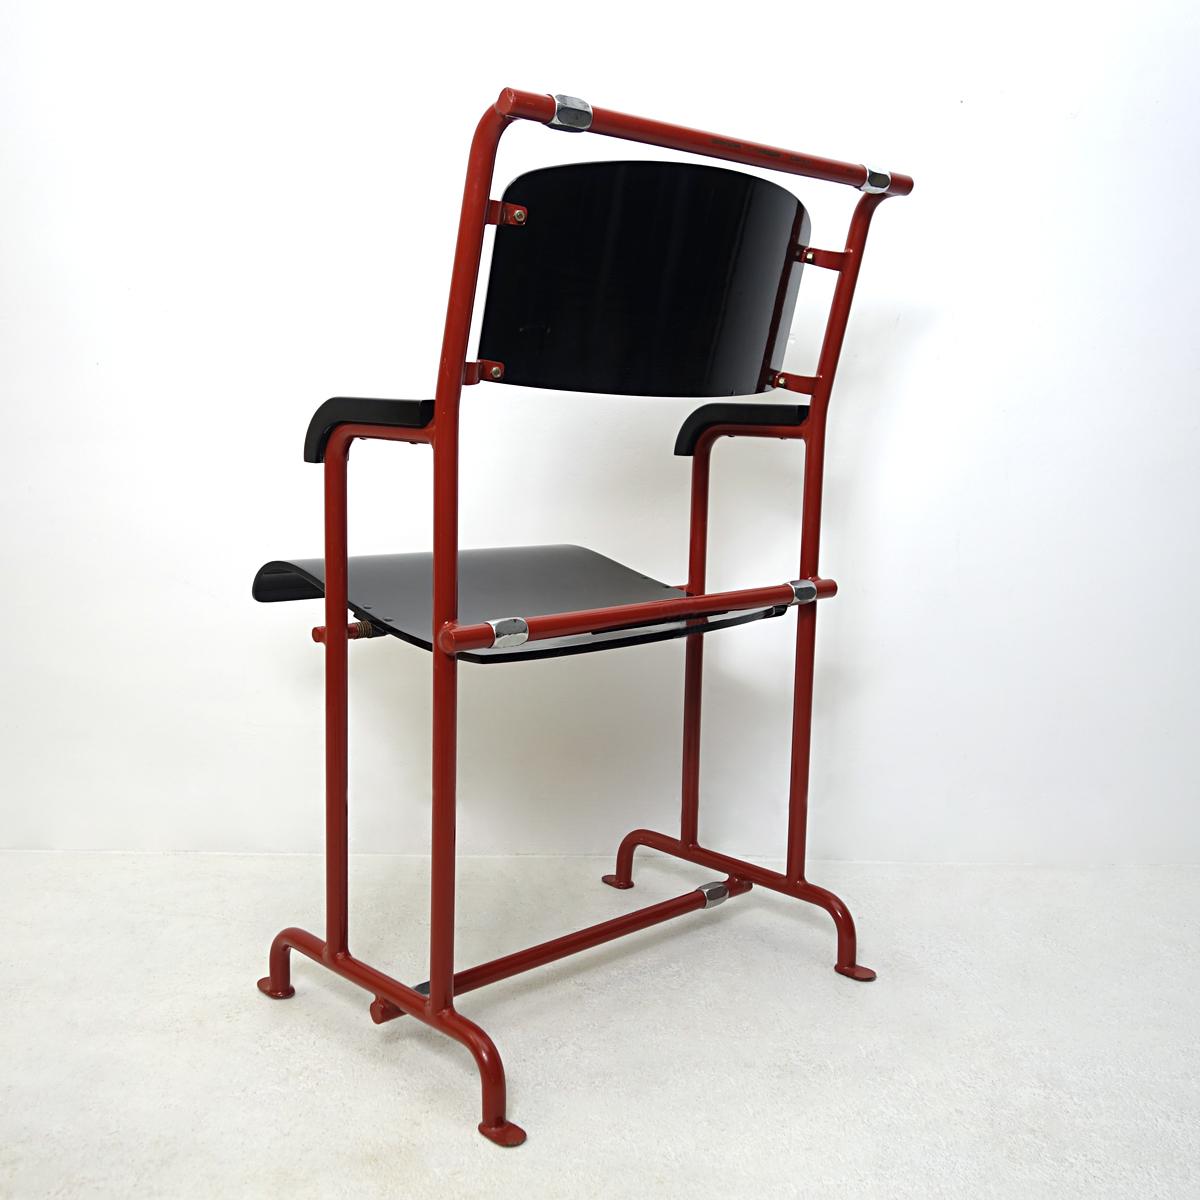 Dutch Modernist Folding Chair by Gerrit Rietveld for Hopmi in Red Metal and Black Wood